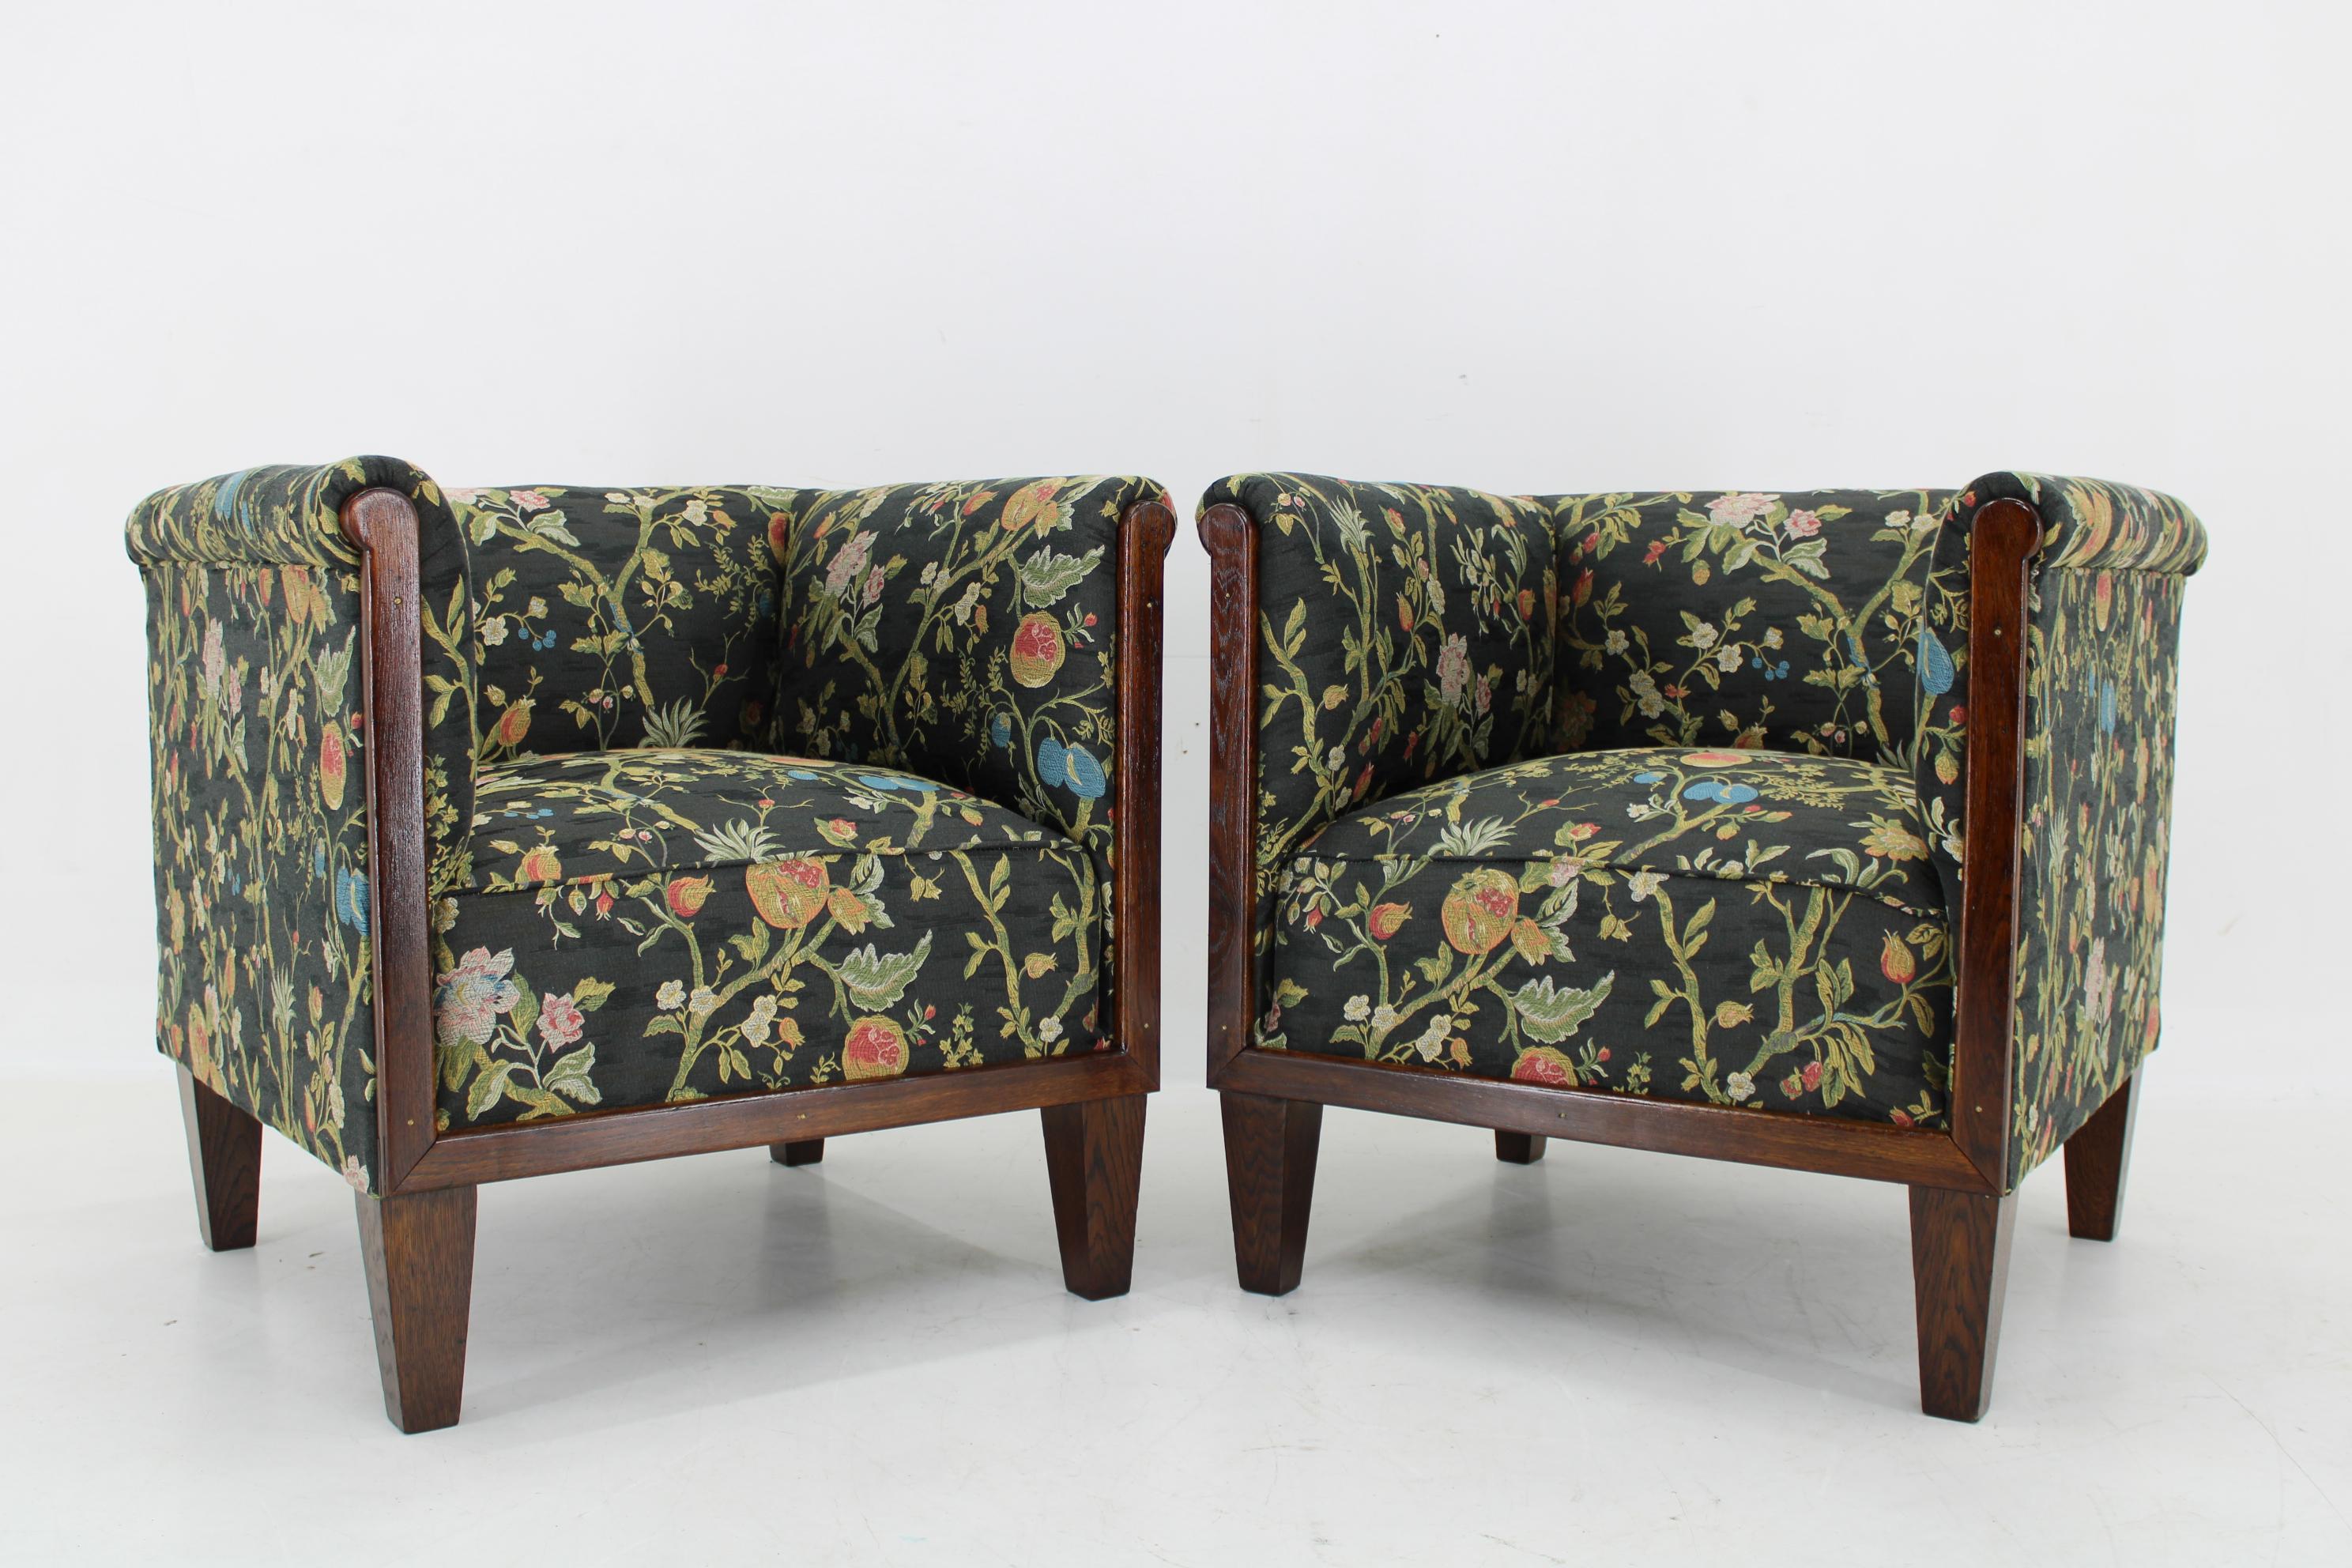  - Newly upholstered in floral pattern fabric
- refinished oak wooden parts